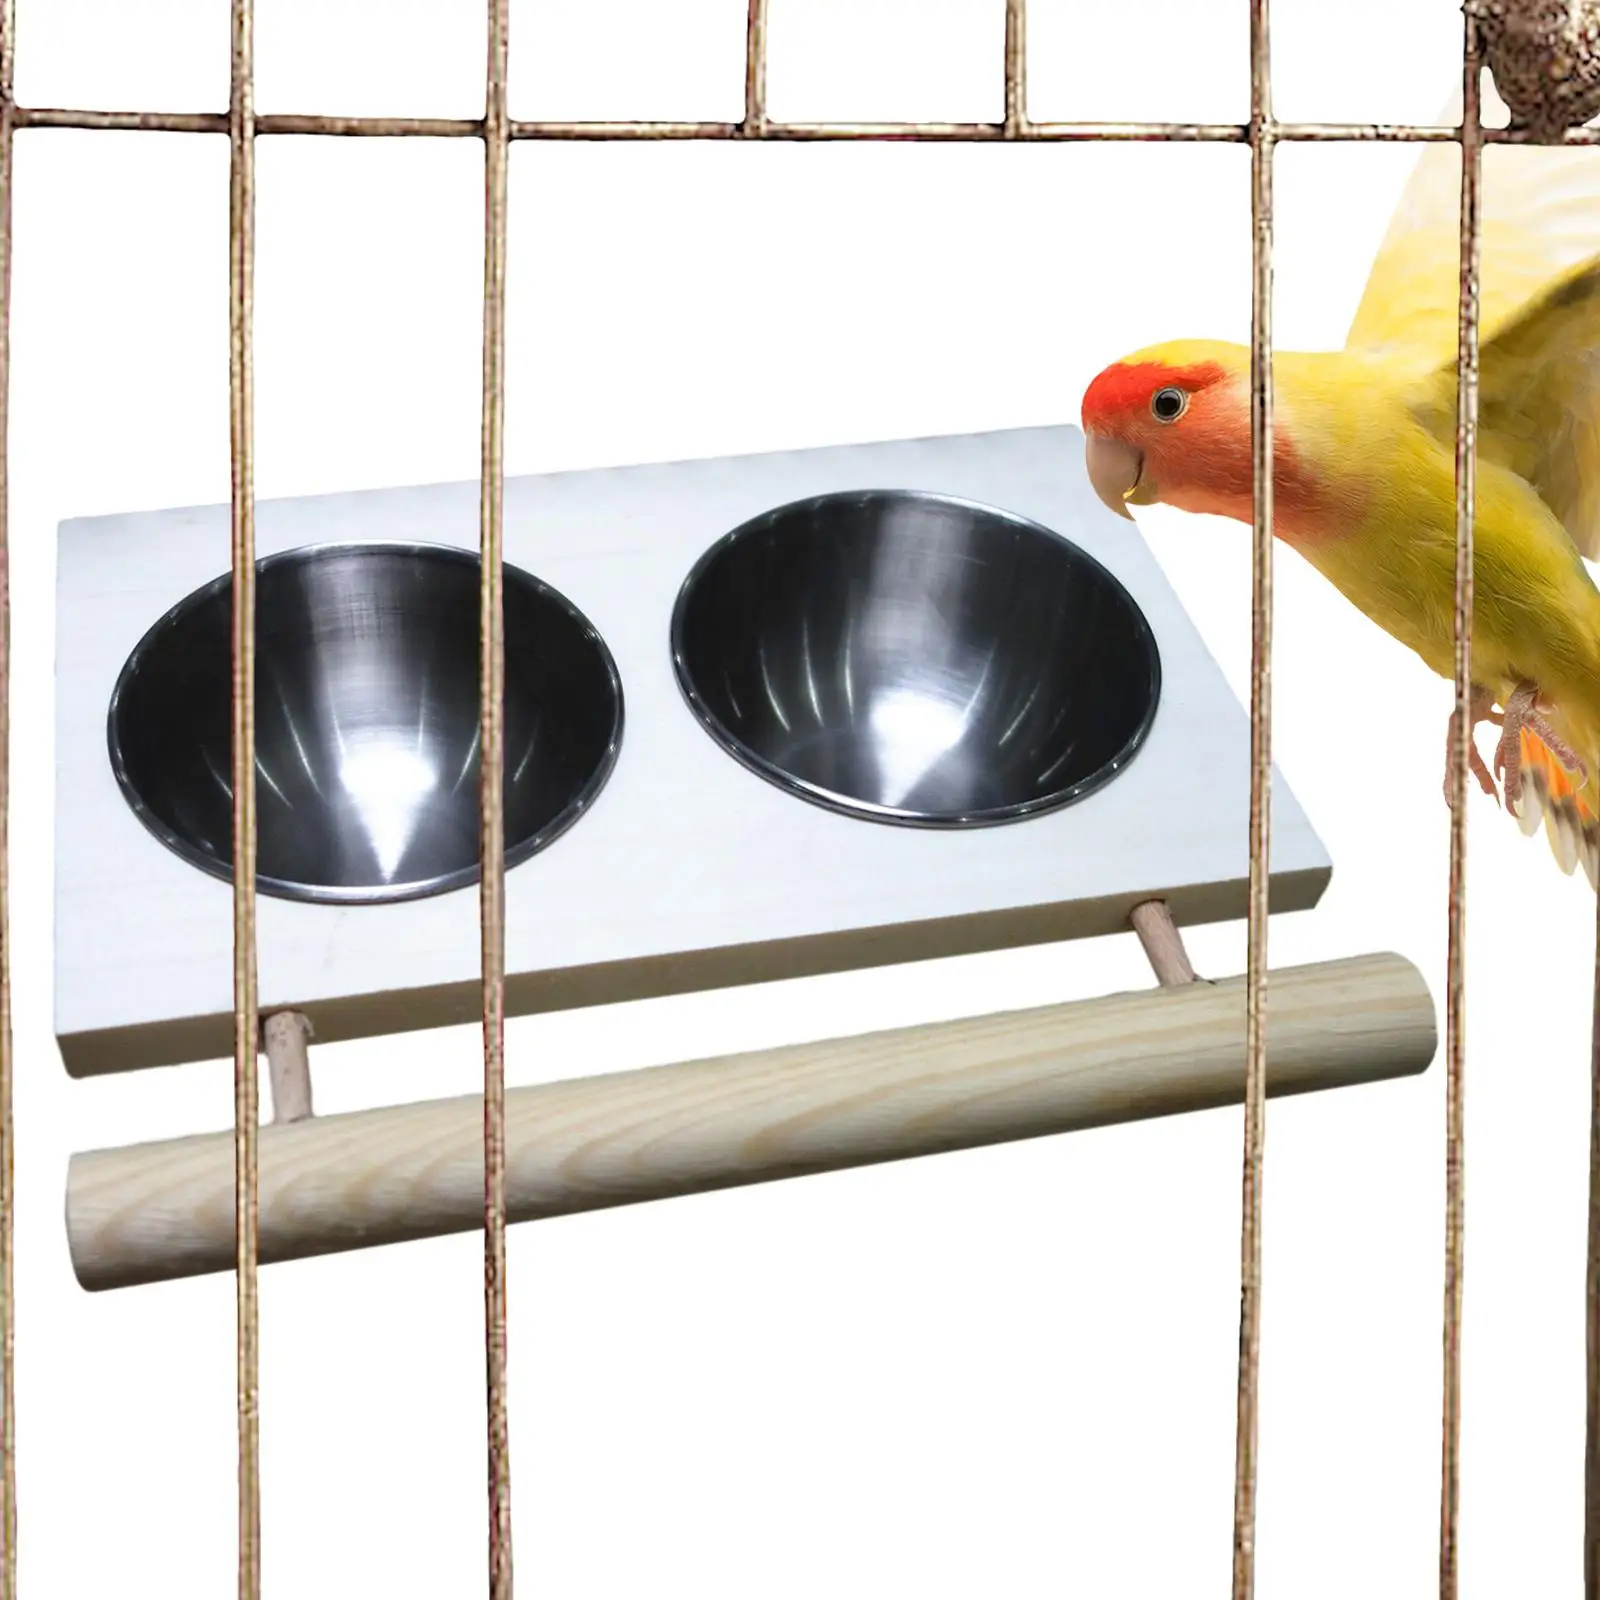 Bird Feeding Dish Cup Feeding and Watering Supplies Sturdy Parrot Cage Feeder Water Bowl for Parrot Parakeets Conures Lovebirds